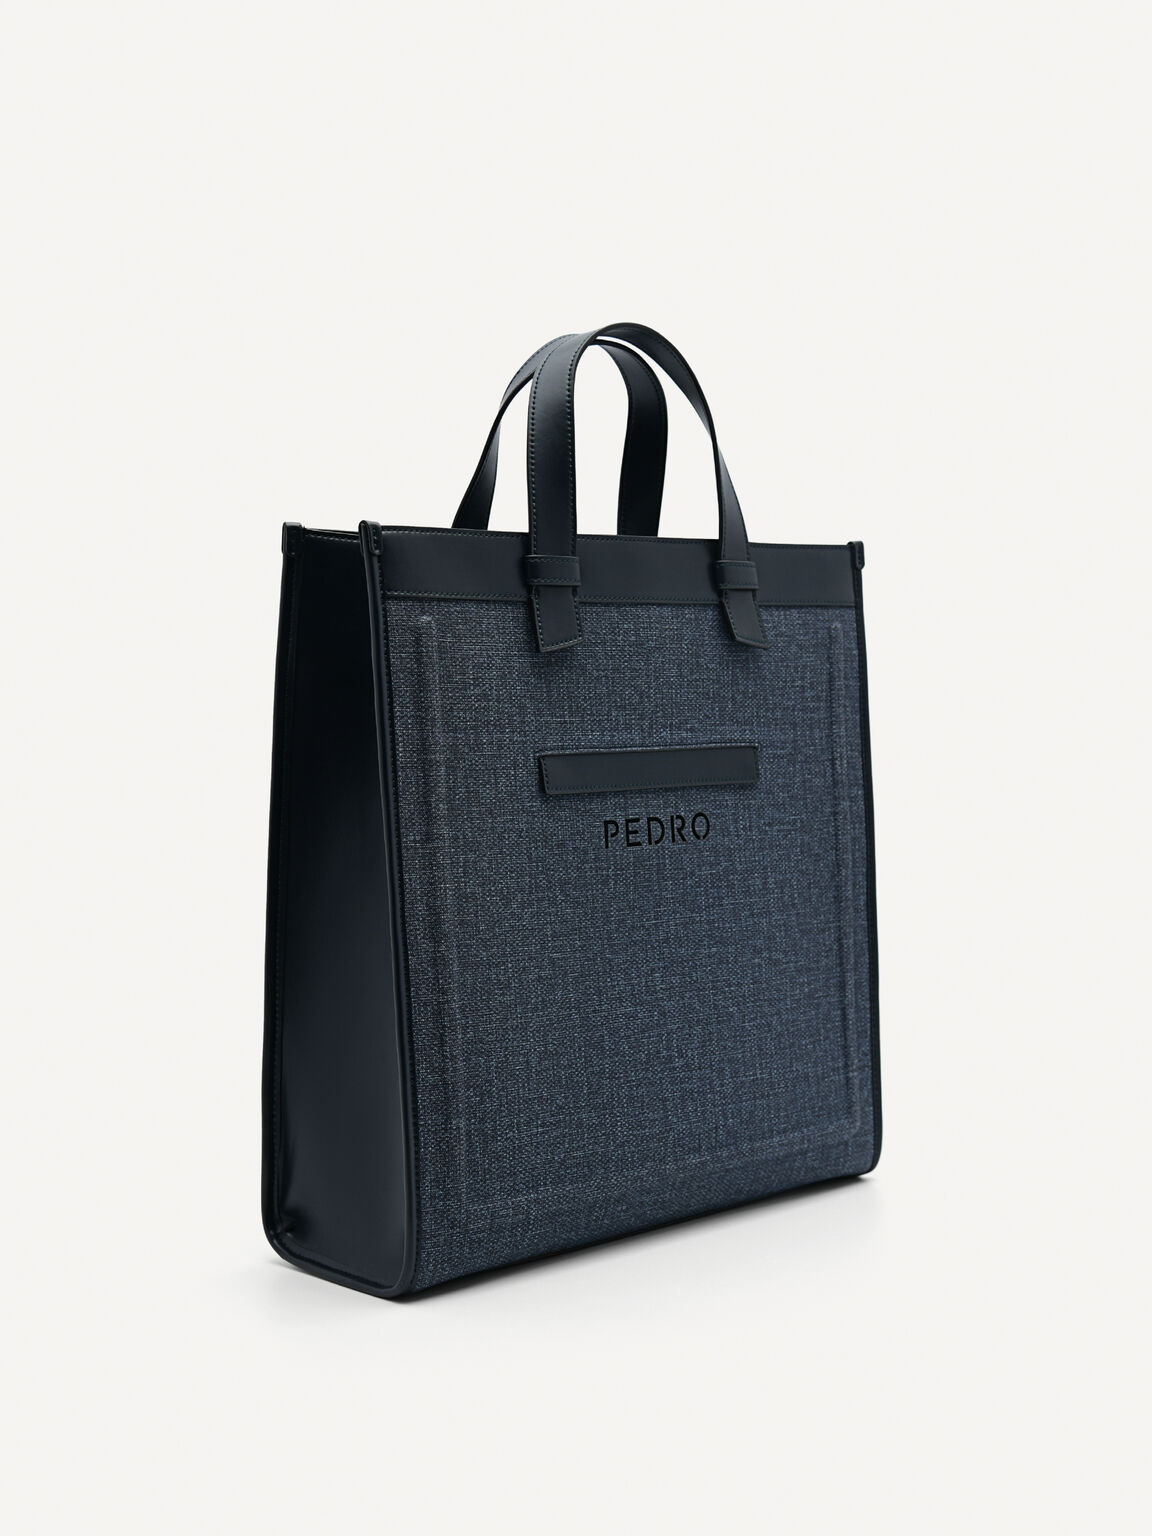 Rory Tote Bag, Navy